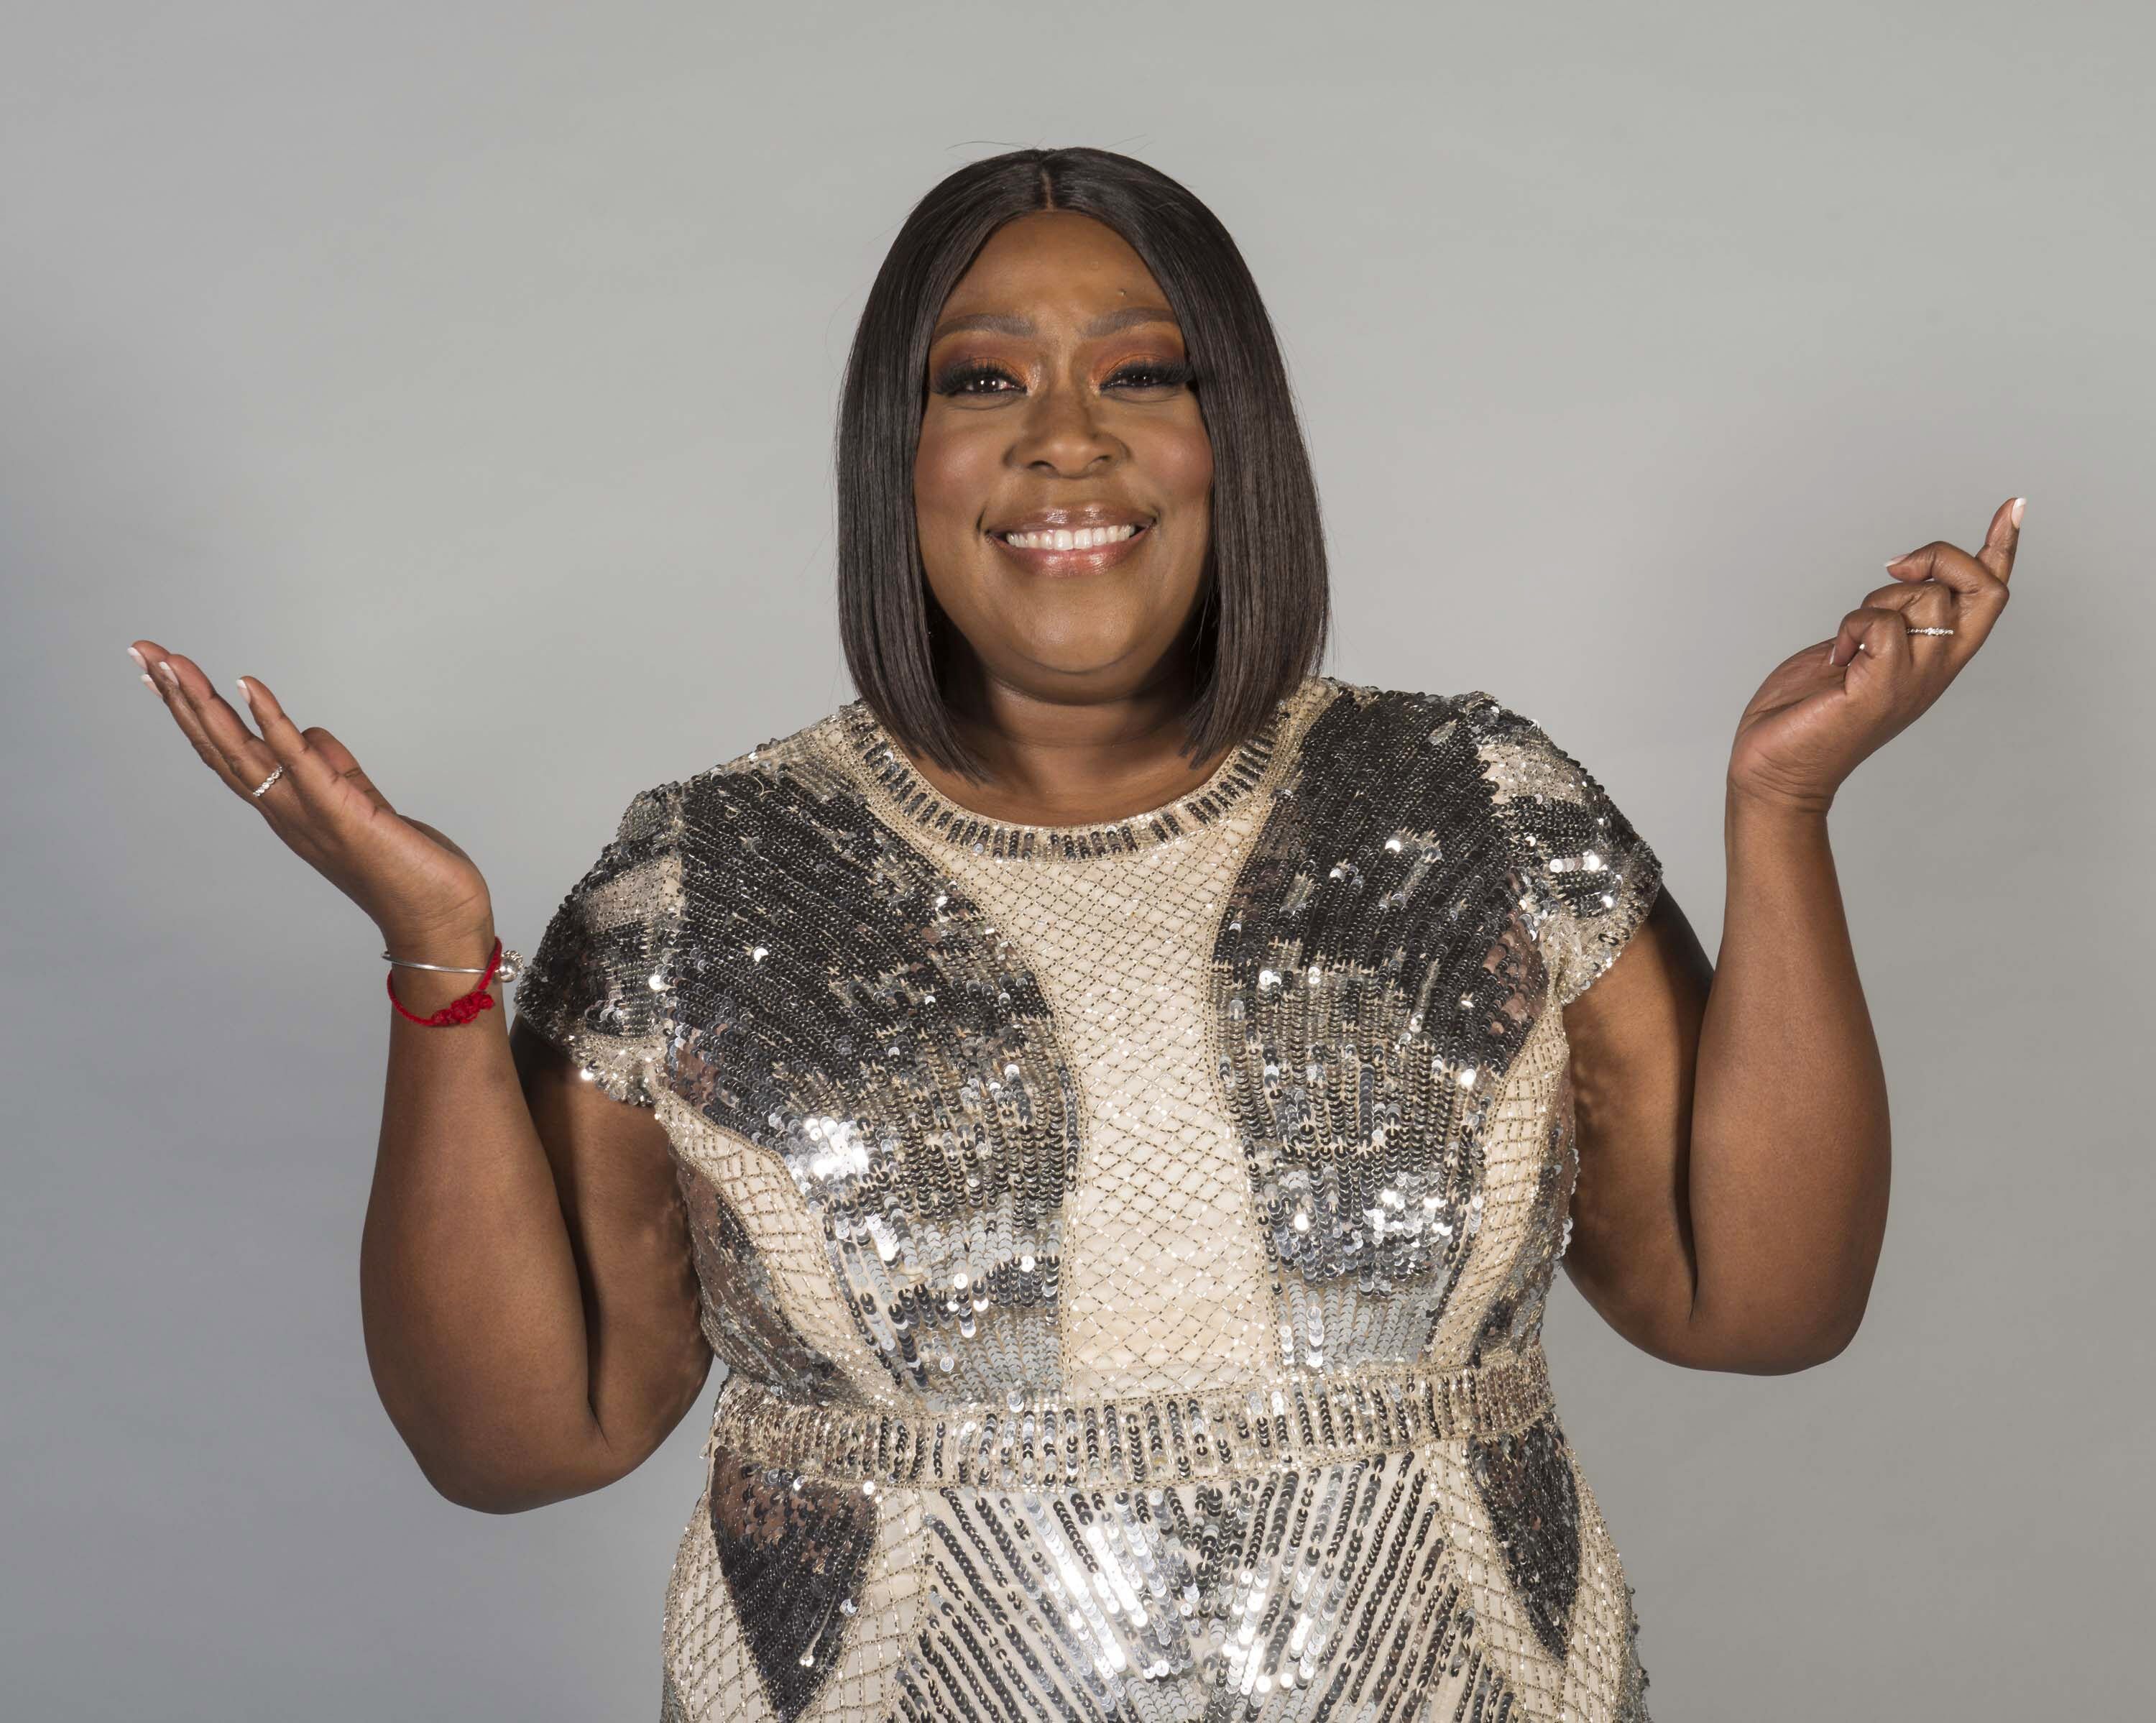 Loni Love poses for portrait at 45th Daytime Emmy Awards - Portraits by The Artists Project Sponsored by the Visual Snow Initiative | Photo: Getty Images